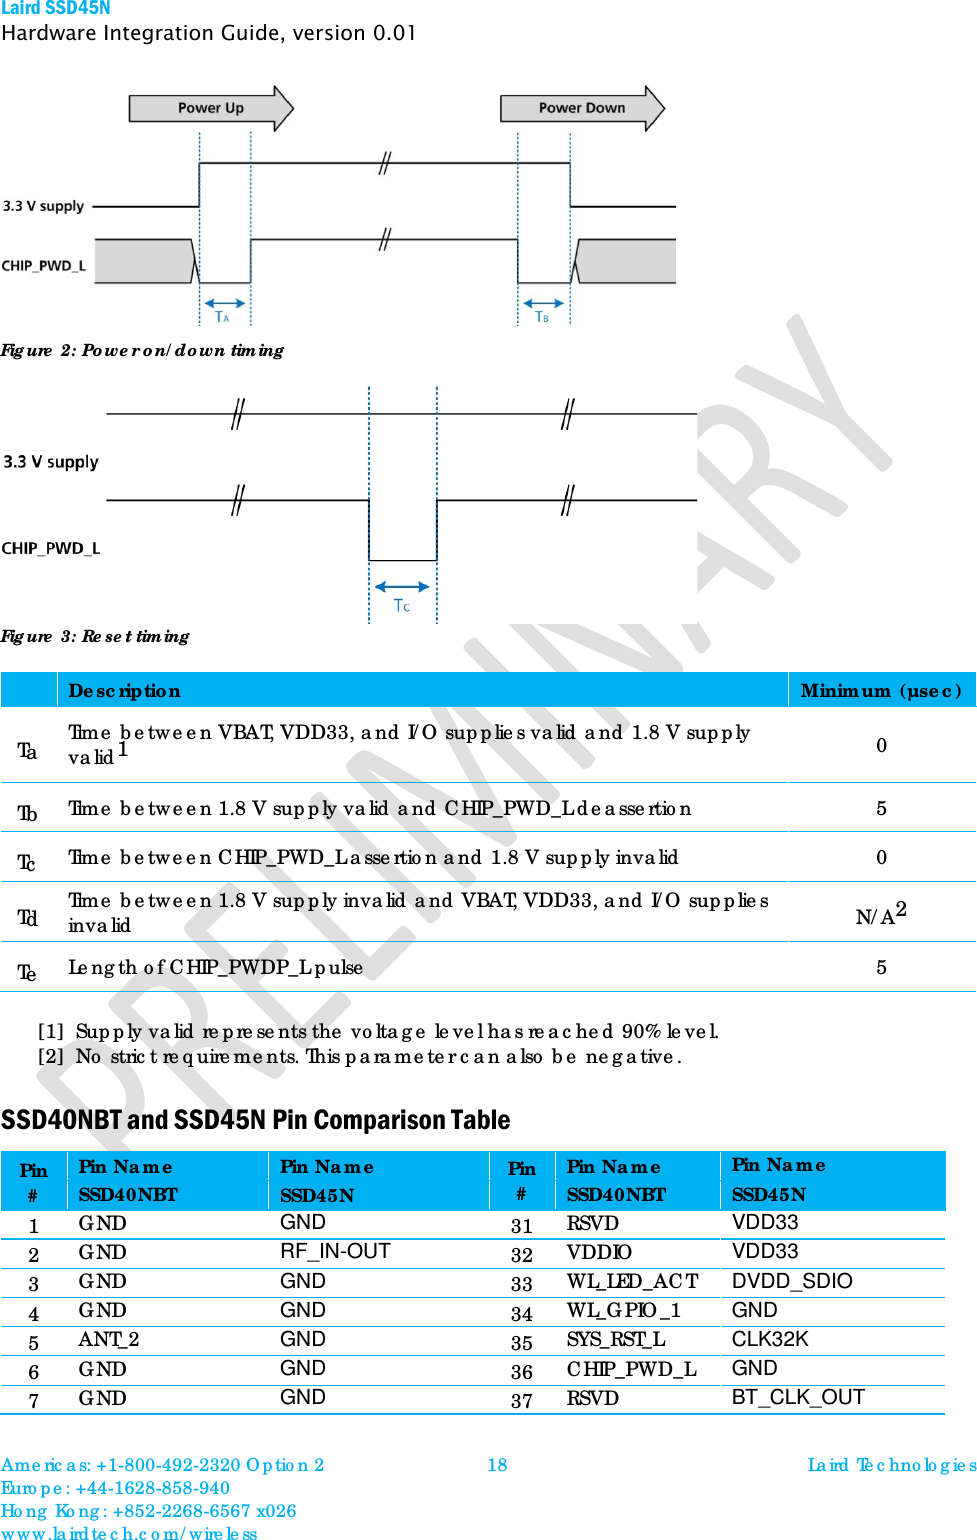 Laird SSD45N Hardware Integration Guide, version 0.01  Figure 2: Power on/down timing  Figure 3: Reset timing  Description Minimum (µsec) Ta Time between VBAT, VDD33, and I/O supplies valid and 1.8 V supply valid1 0 Tb Time between 1.8 V supply valid and CHIP_PWD_L deassertion  5 Tc Time between CHIP_PWD_L assertion and 1.8 V supply invalid  0 Td Time between 1.8 V supply invalid and VBAT, VDD33, and I/O supplies invalid N/A2 Te Length of CHIP_PWDP_L pulse  5  [1] Supply valid represents the voltage level has reached 90% level. [2] No strict requirements. This parameter can also be negative. SSD40NBT and SSD45N Pin Comparison Table Pin # Pin Name Pin Name Pin # Pin Name Pin Name SSD40NBT SSD45N SSD40NBT SSD45N 1 GND GND  31 RSVD VDD33  2 GND RF_IN-OUT  32 VDDIO VDD33  3 GND GND  33 WL_LED_ACT DVDD_SDIO  4 GND GND  34 WL_GPIO_1 GND  5 ANT_2 GND  35 SYS_RST_L CLK32K  6 GND GND  36 CHIP_PWD_L GND  7 GND GND  37 RSVD BT_CLK_OUT   Americas: +1-800-492-2320 Option 2 Europe: +44-1628-858-940 Hong Kong: +852-2268-6567 x026 www.lairdtech.com/wireless 18 Laird Technologies  